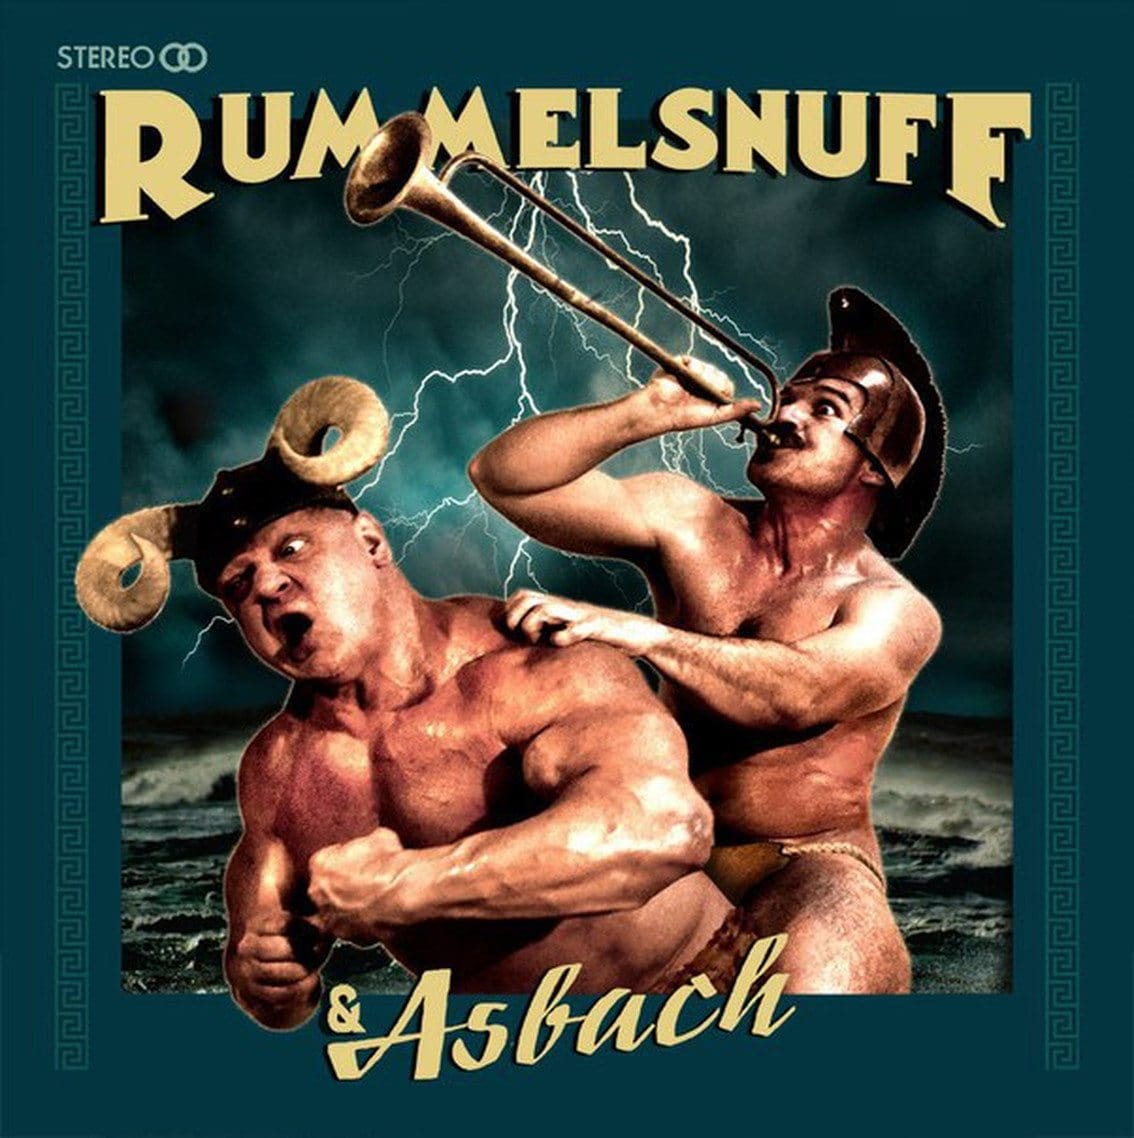 5th album Rummelsnuff, 'Rummelsnuff & Asbach', gets a vinyl and 2CD release